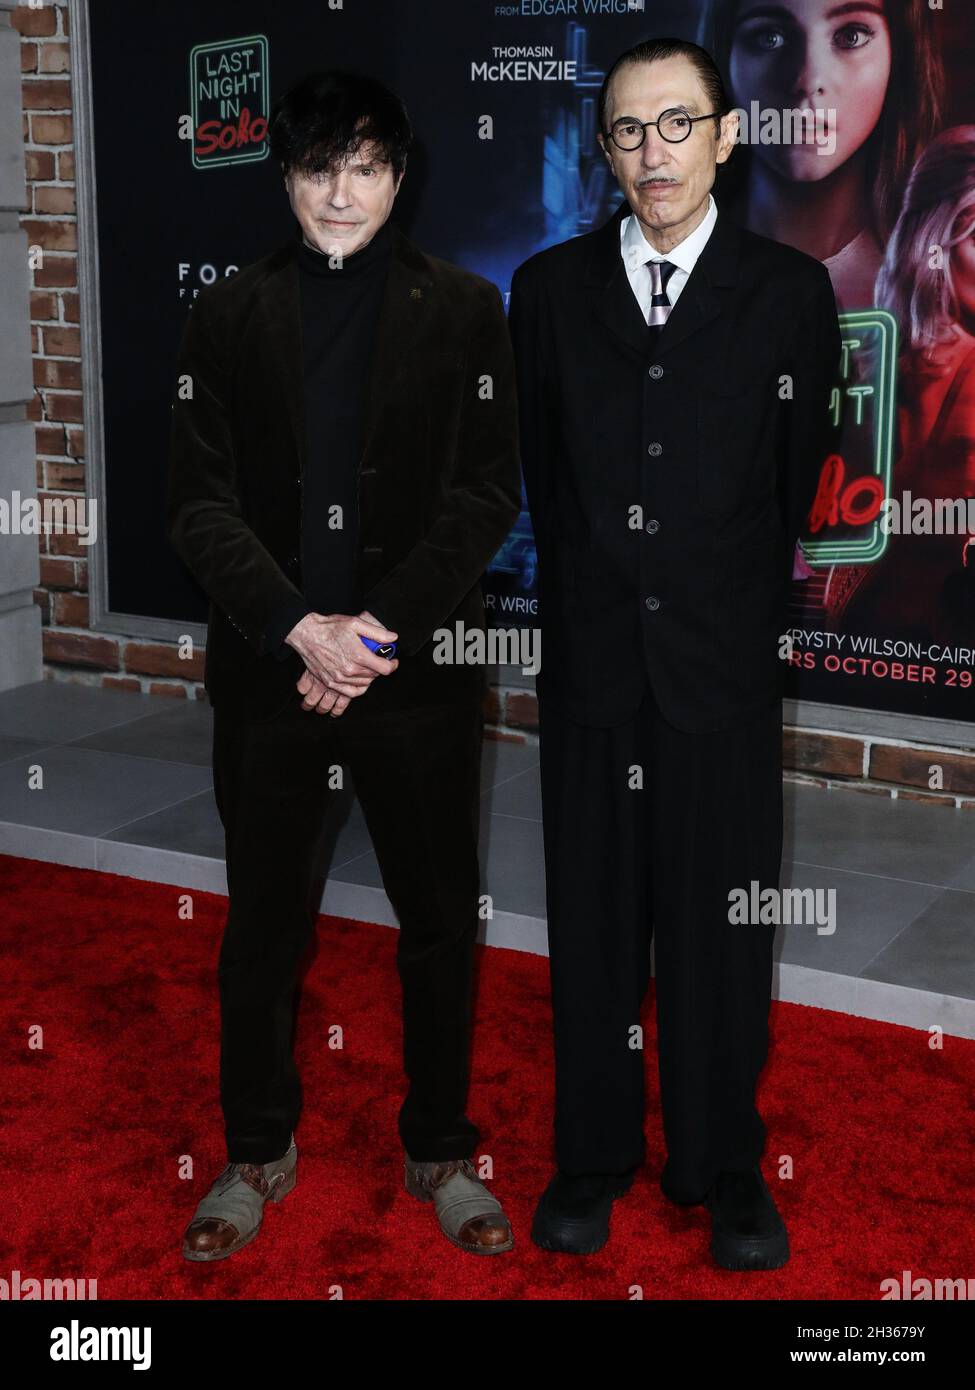 Los Angeles, United States. 25th Oct, 2021. LOS ANGELES, CALIFORNIA, USA - OCTOBER 25: Singer Russell Mael and brother/musician Ron Mael of Sparks arrive at the Los Angeles Premiere Of Focus Features' 'Last Night In Soho' held at the Academy Museum of Motion Pictures on October 25, 2021 in Los Angeles, California, United States. (Photo by Xavier Collin/Image Press Agency/Sipa USA) Credit: Sipa USA/Alamy Live News Stock Photo